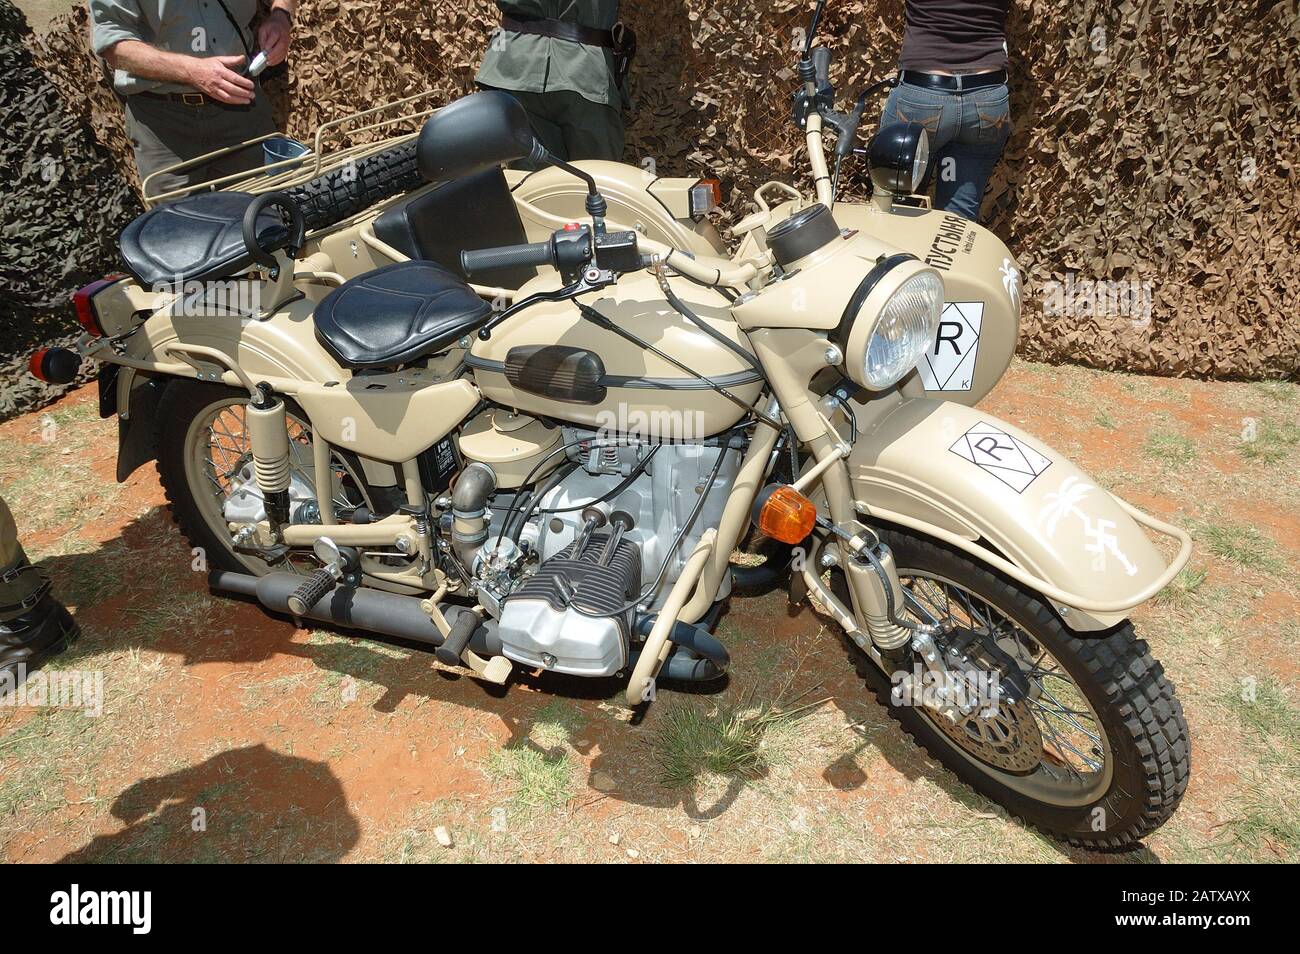 BLOEMFONTEIN, SOUTH AFRICA - NOVEMBER 1, 2008: A Ural sidecar motorcycle at the South African Armour Museum at the Tempe Military Base Stock Photo